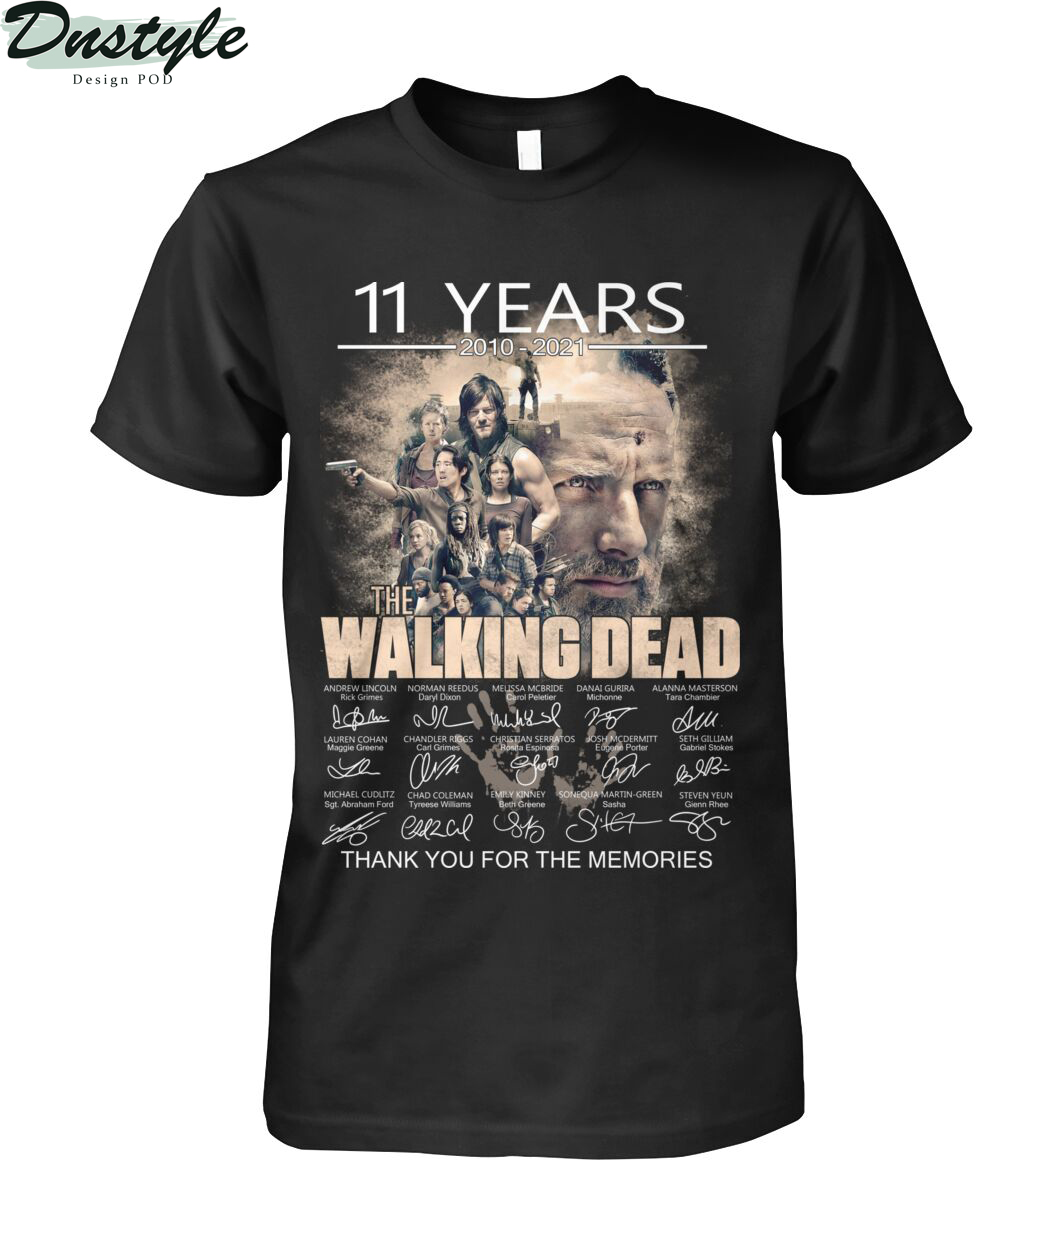 The walking dead 11 years 2010-2021 thank you for the memories shirt